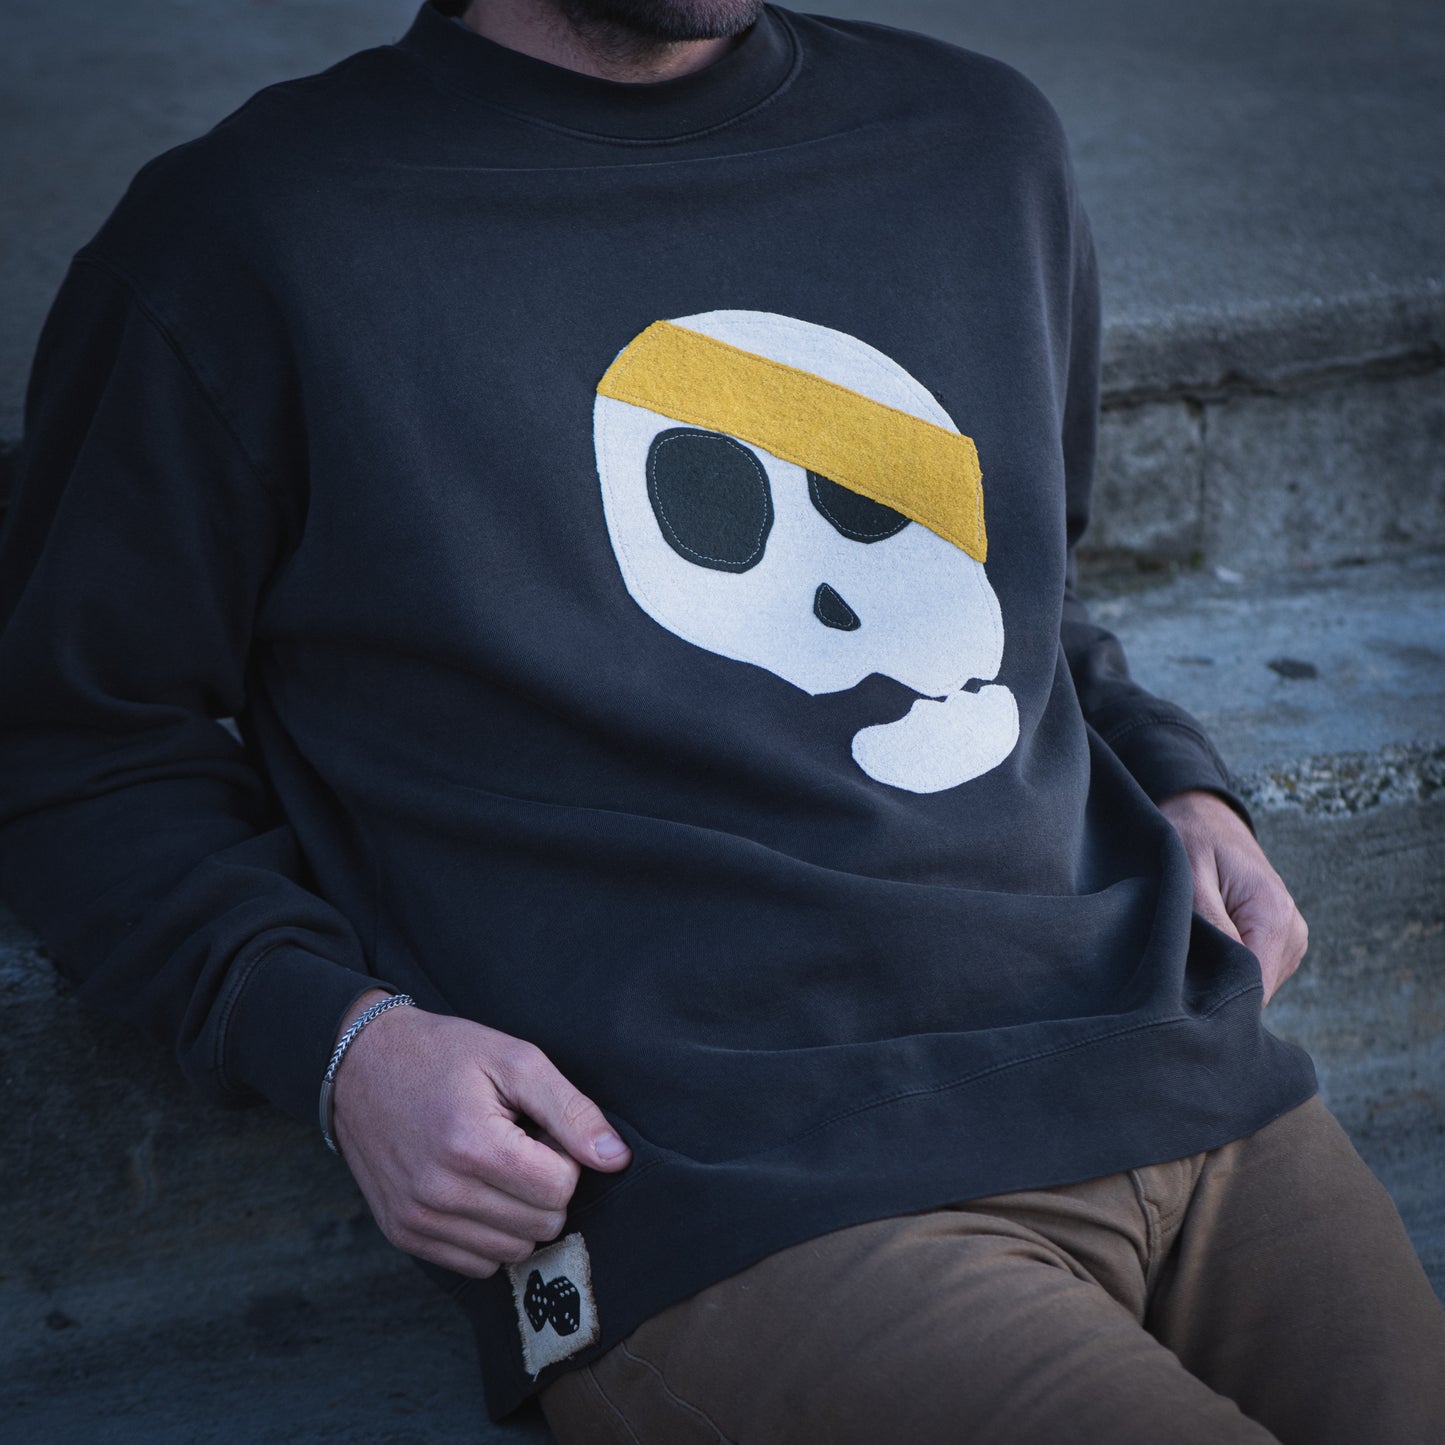 The "Pirates Life is Not for Me" crew sweatshirt